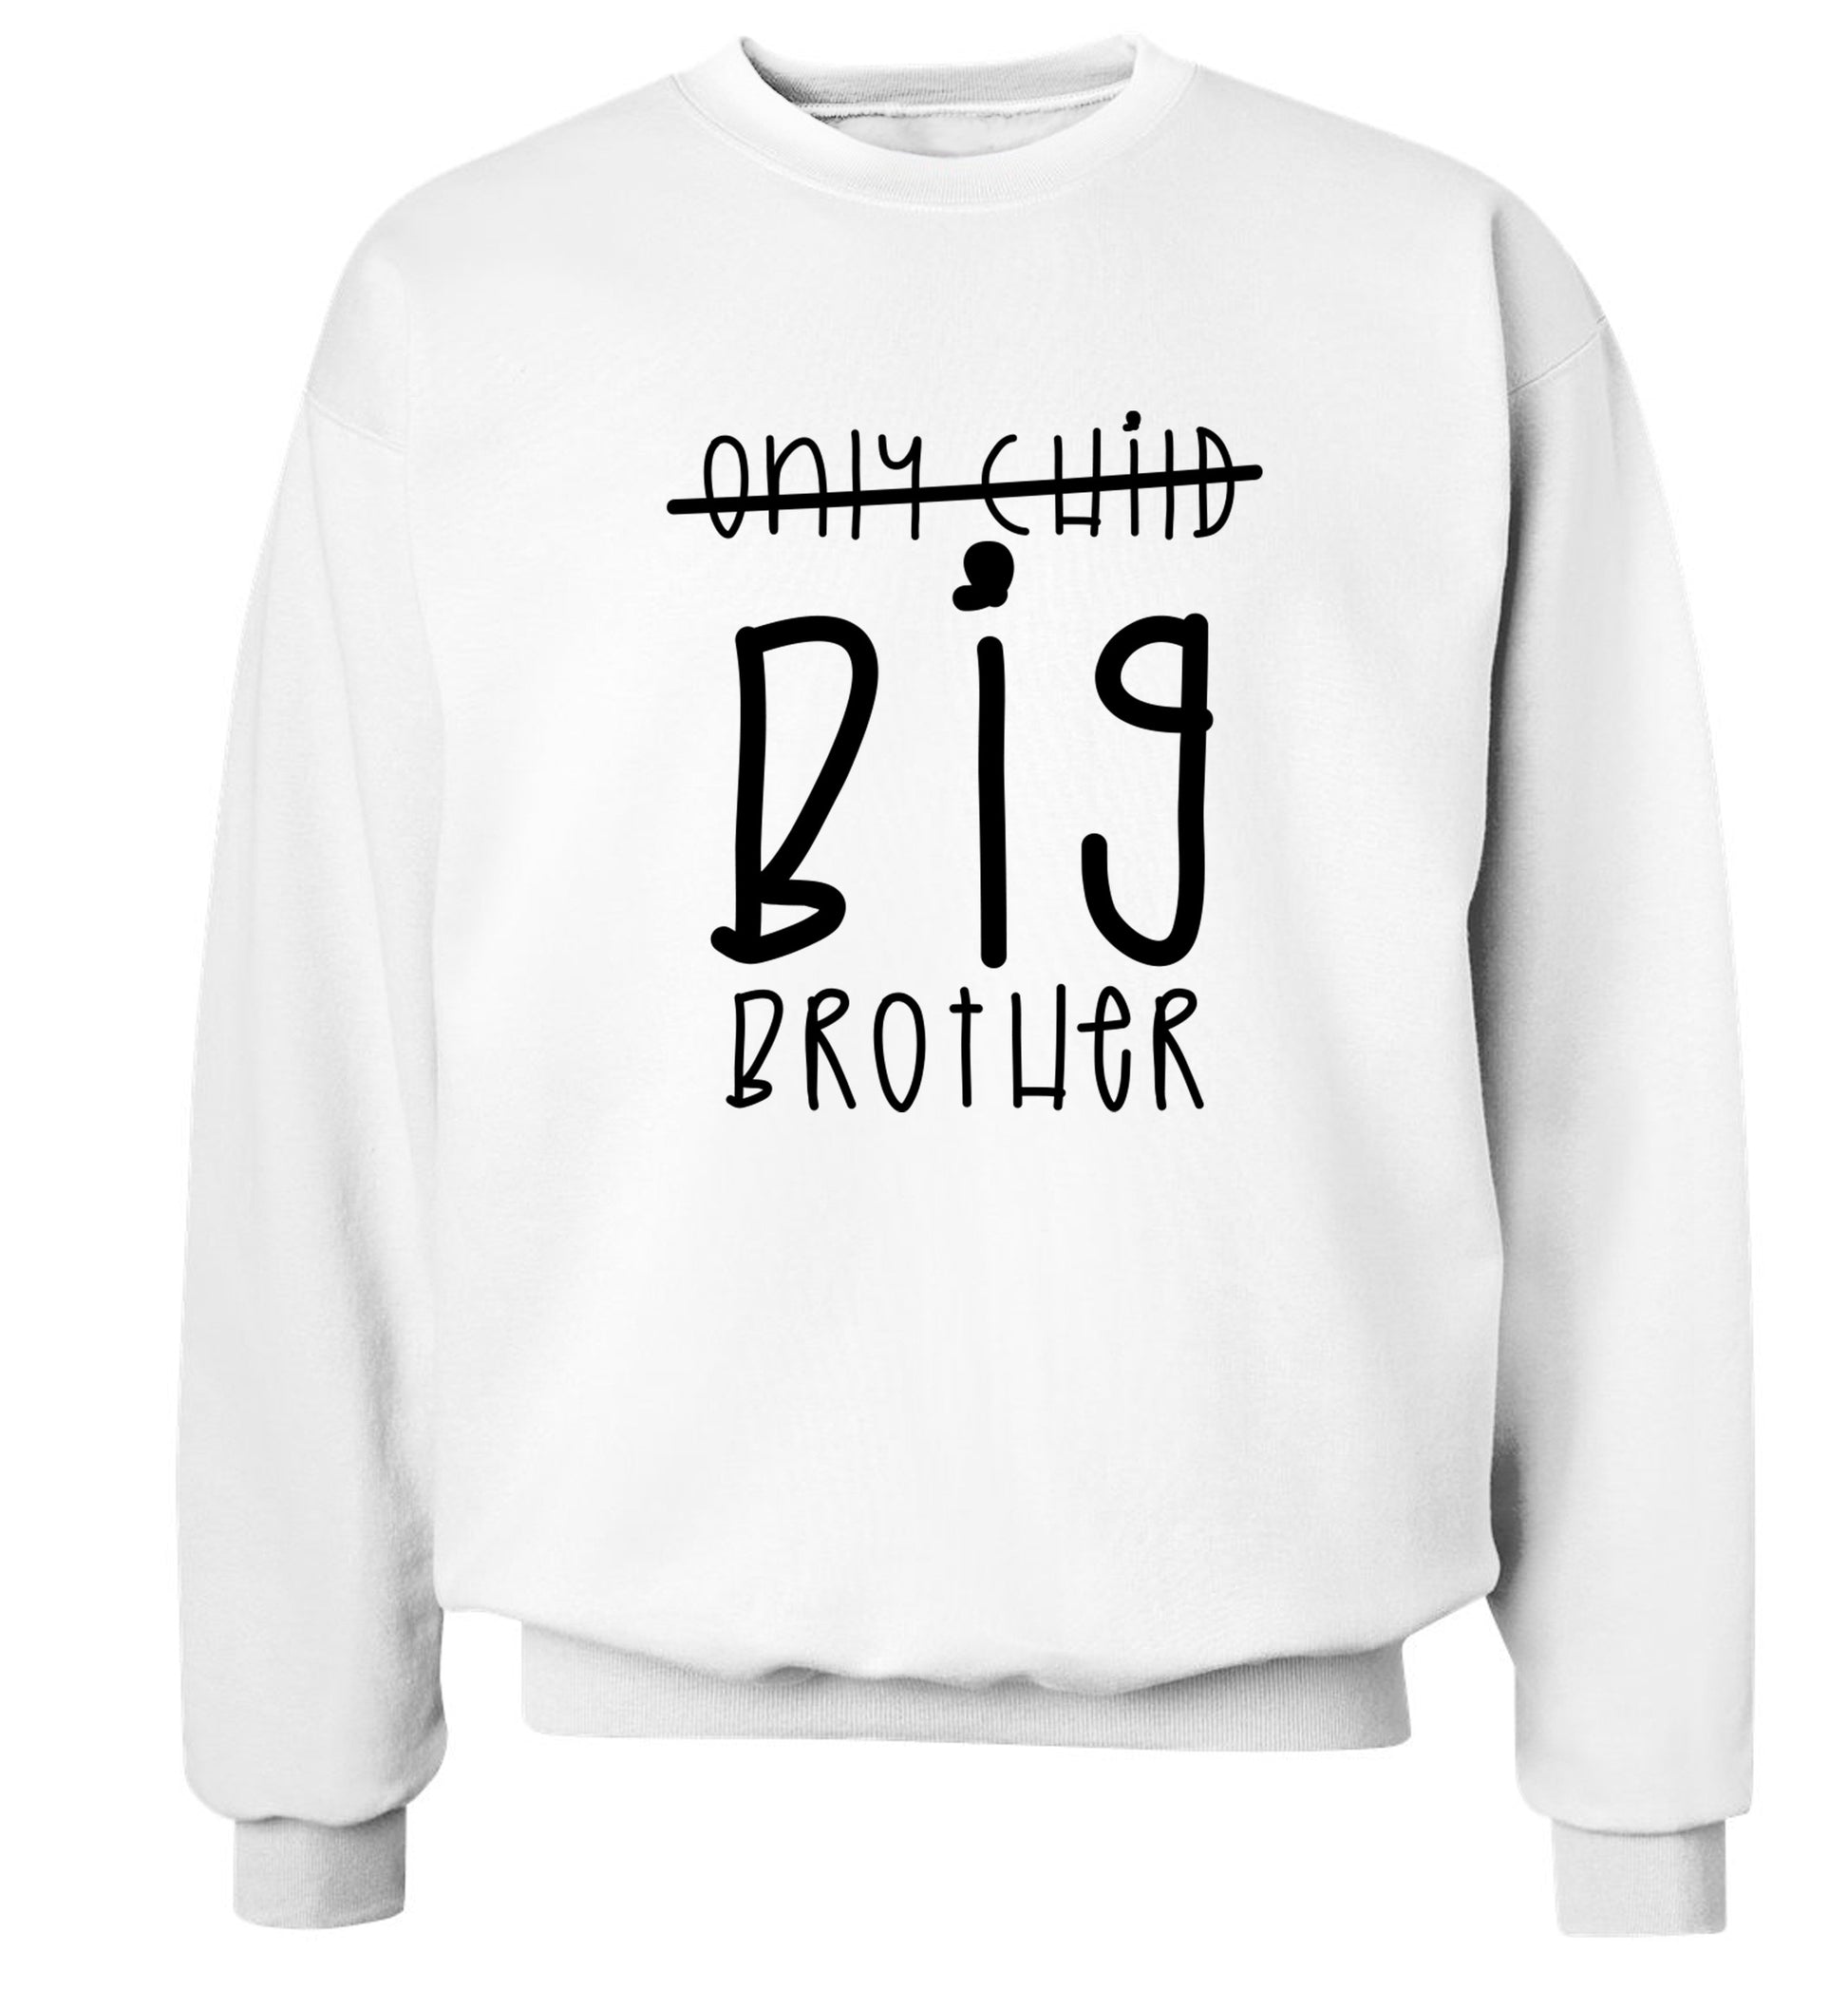 Only child big brother Adult's unisex white Sweater 2XL